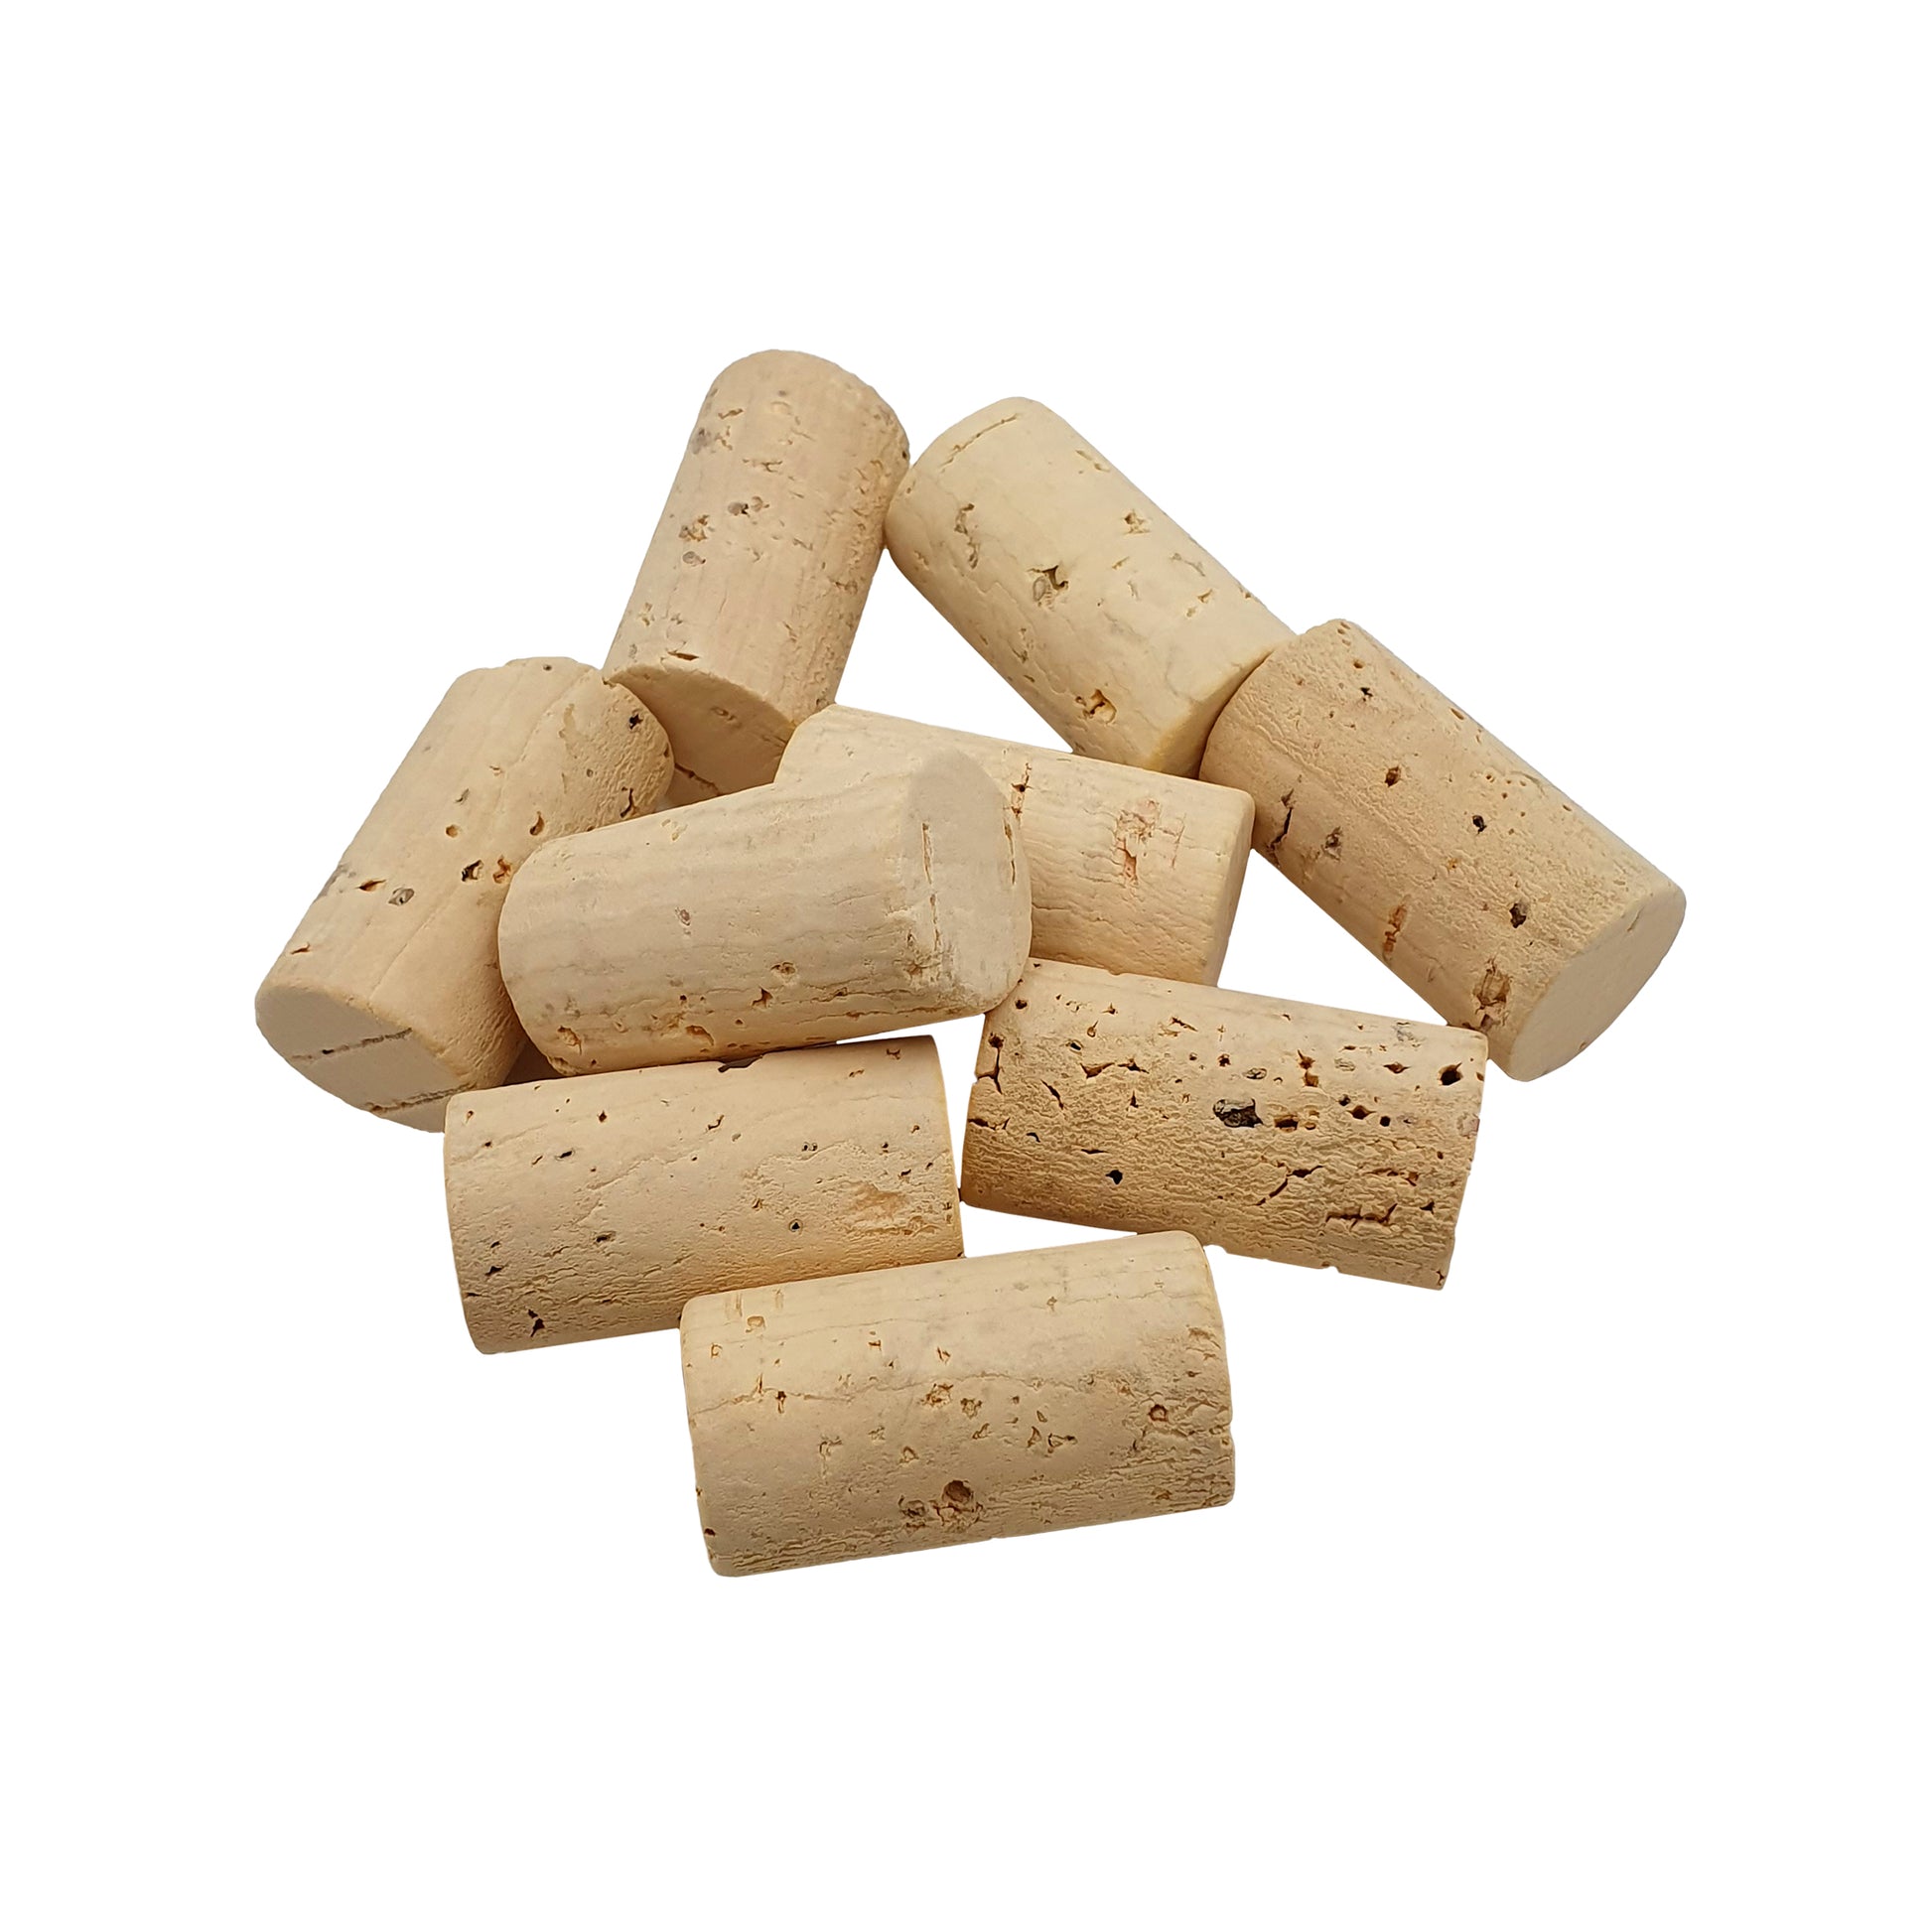 bag of 100 natural corks reference 1 - last up to 5 five years. 